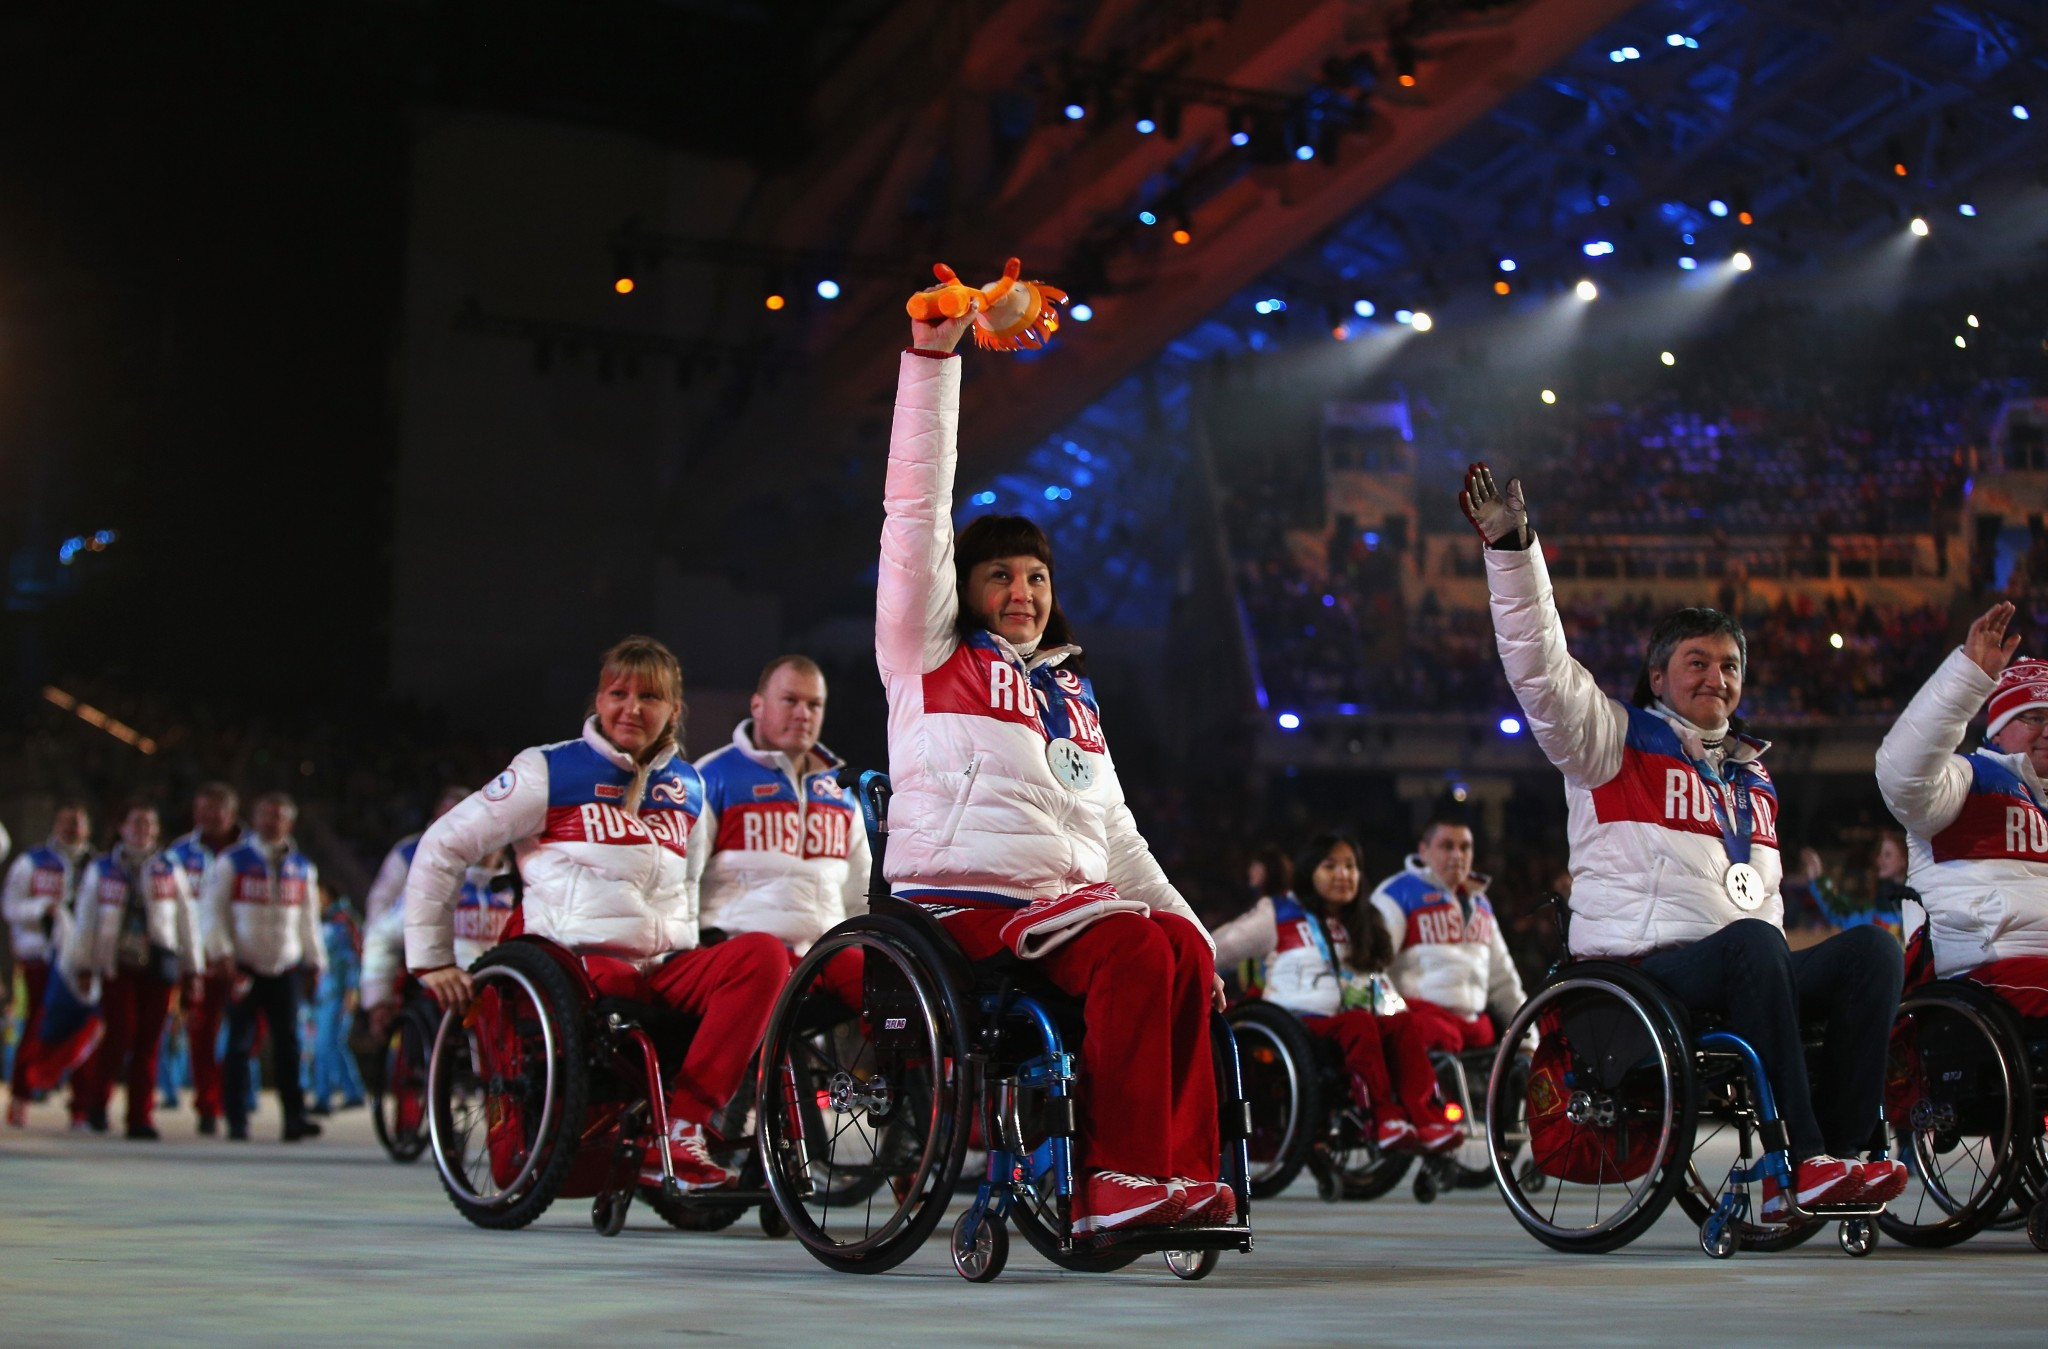 Russia could miss the 2018 Winter Paralympic Games in Pyeongchang following the doping scandal which emerged after they had finished top of the medals table at Sochi 2014 ©Getty Images